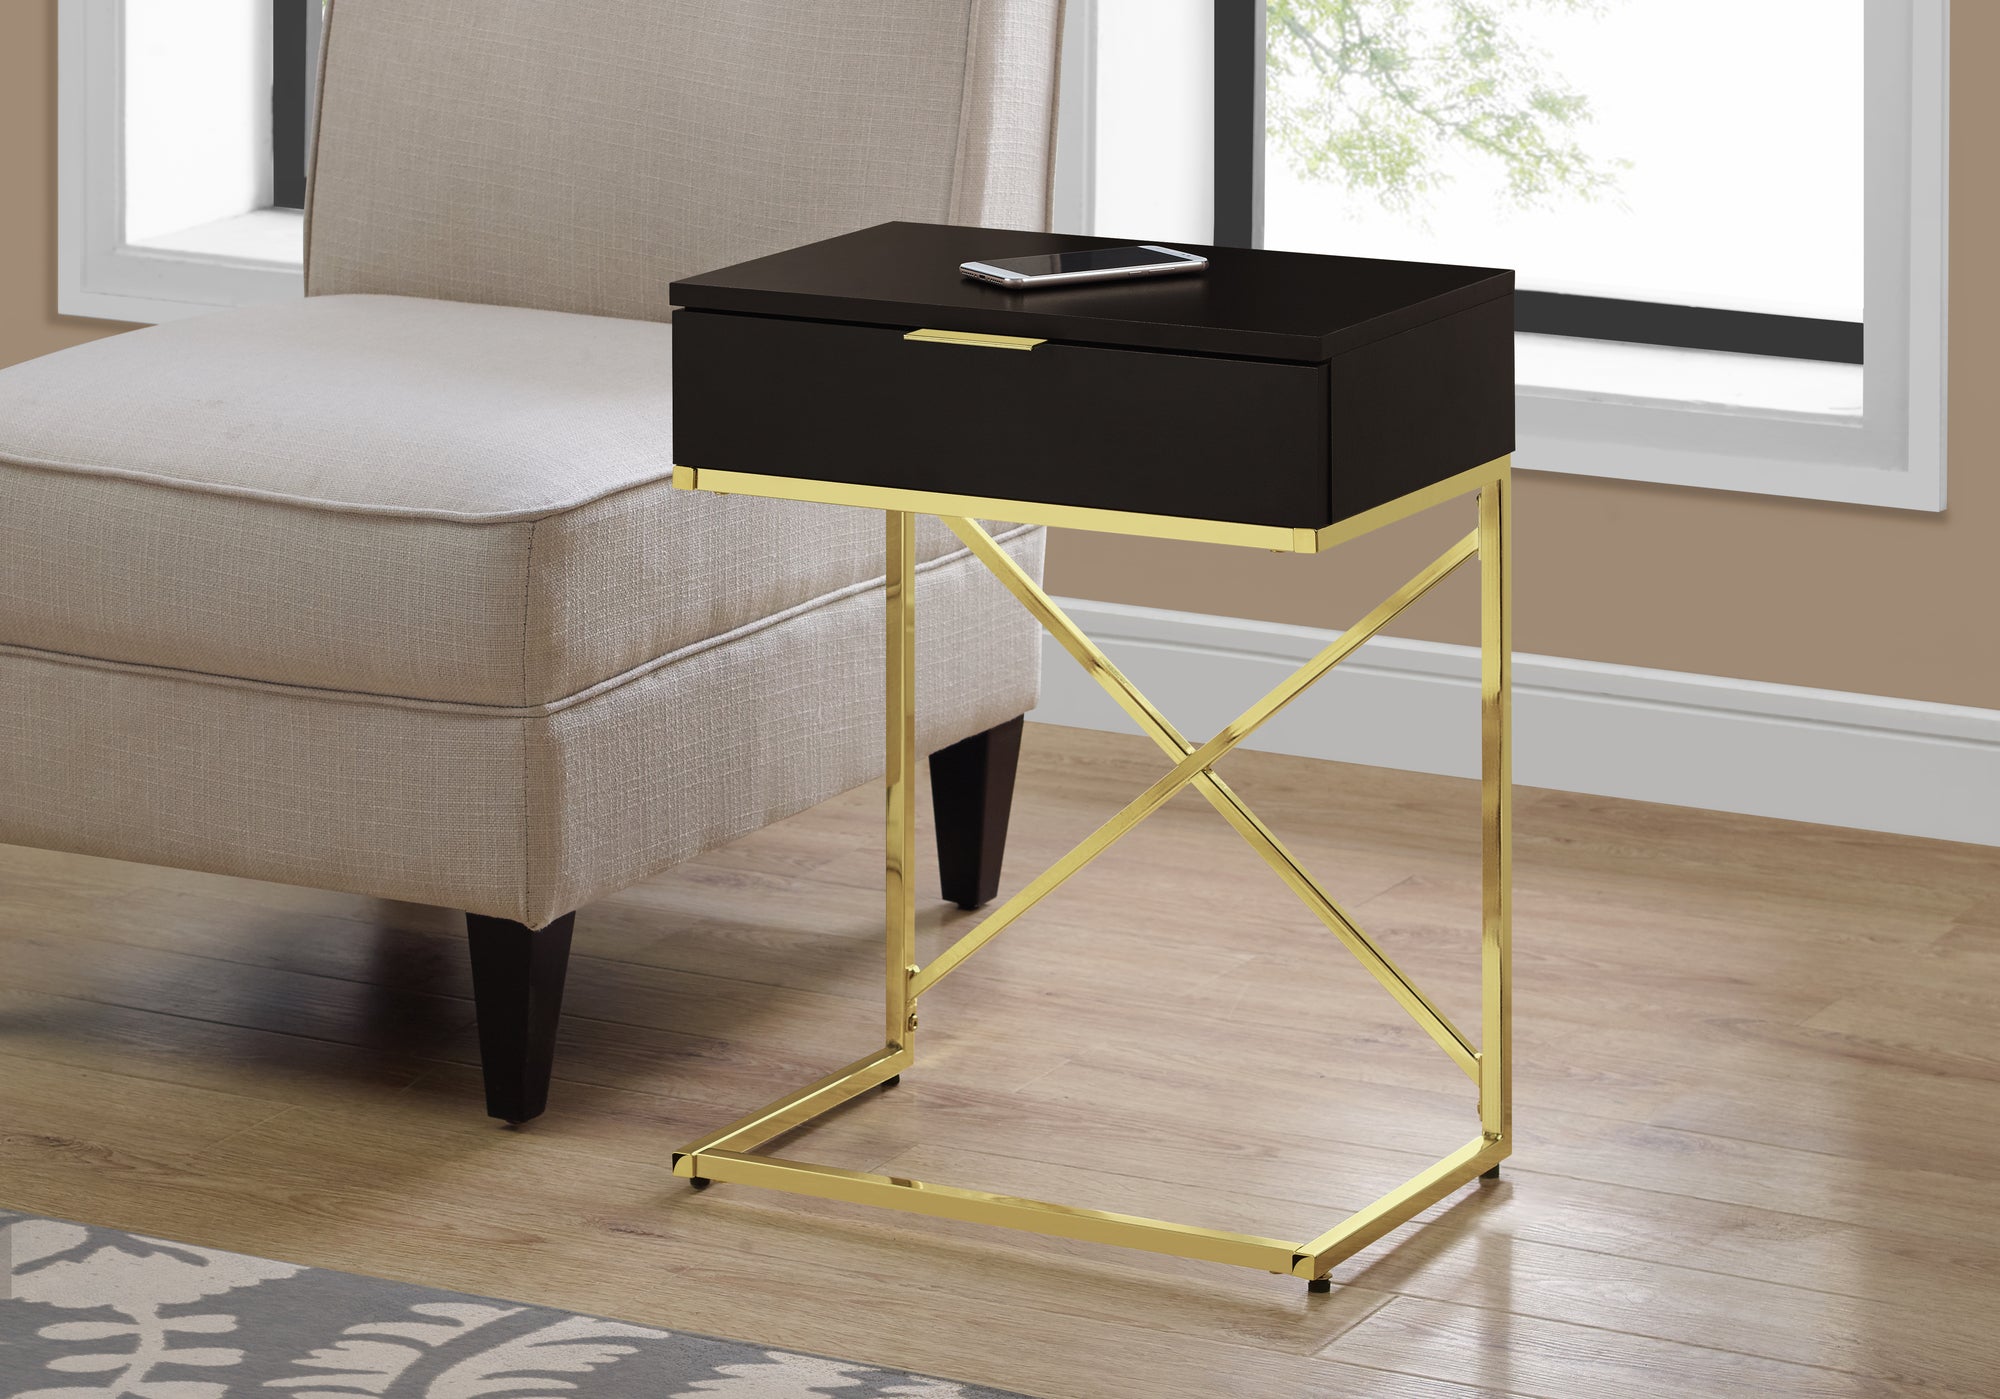 MN-853476    Accent Table, Side, End, Nightstand, Lamp, Living Room, Bedroom, Metal Legs, Laminate, Dark Brown, Gold, Contemporary, Modern